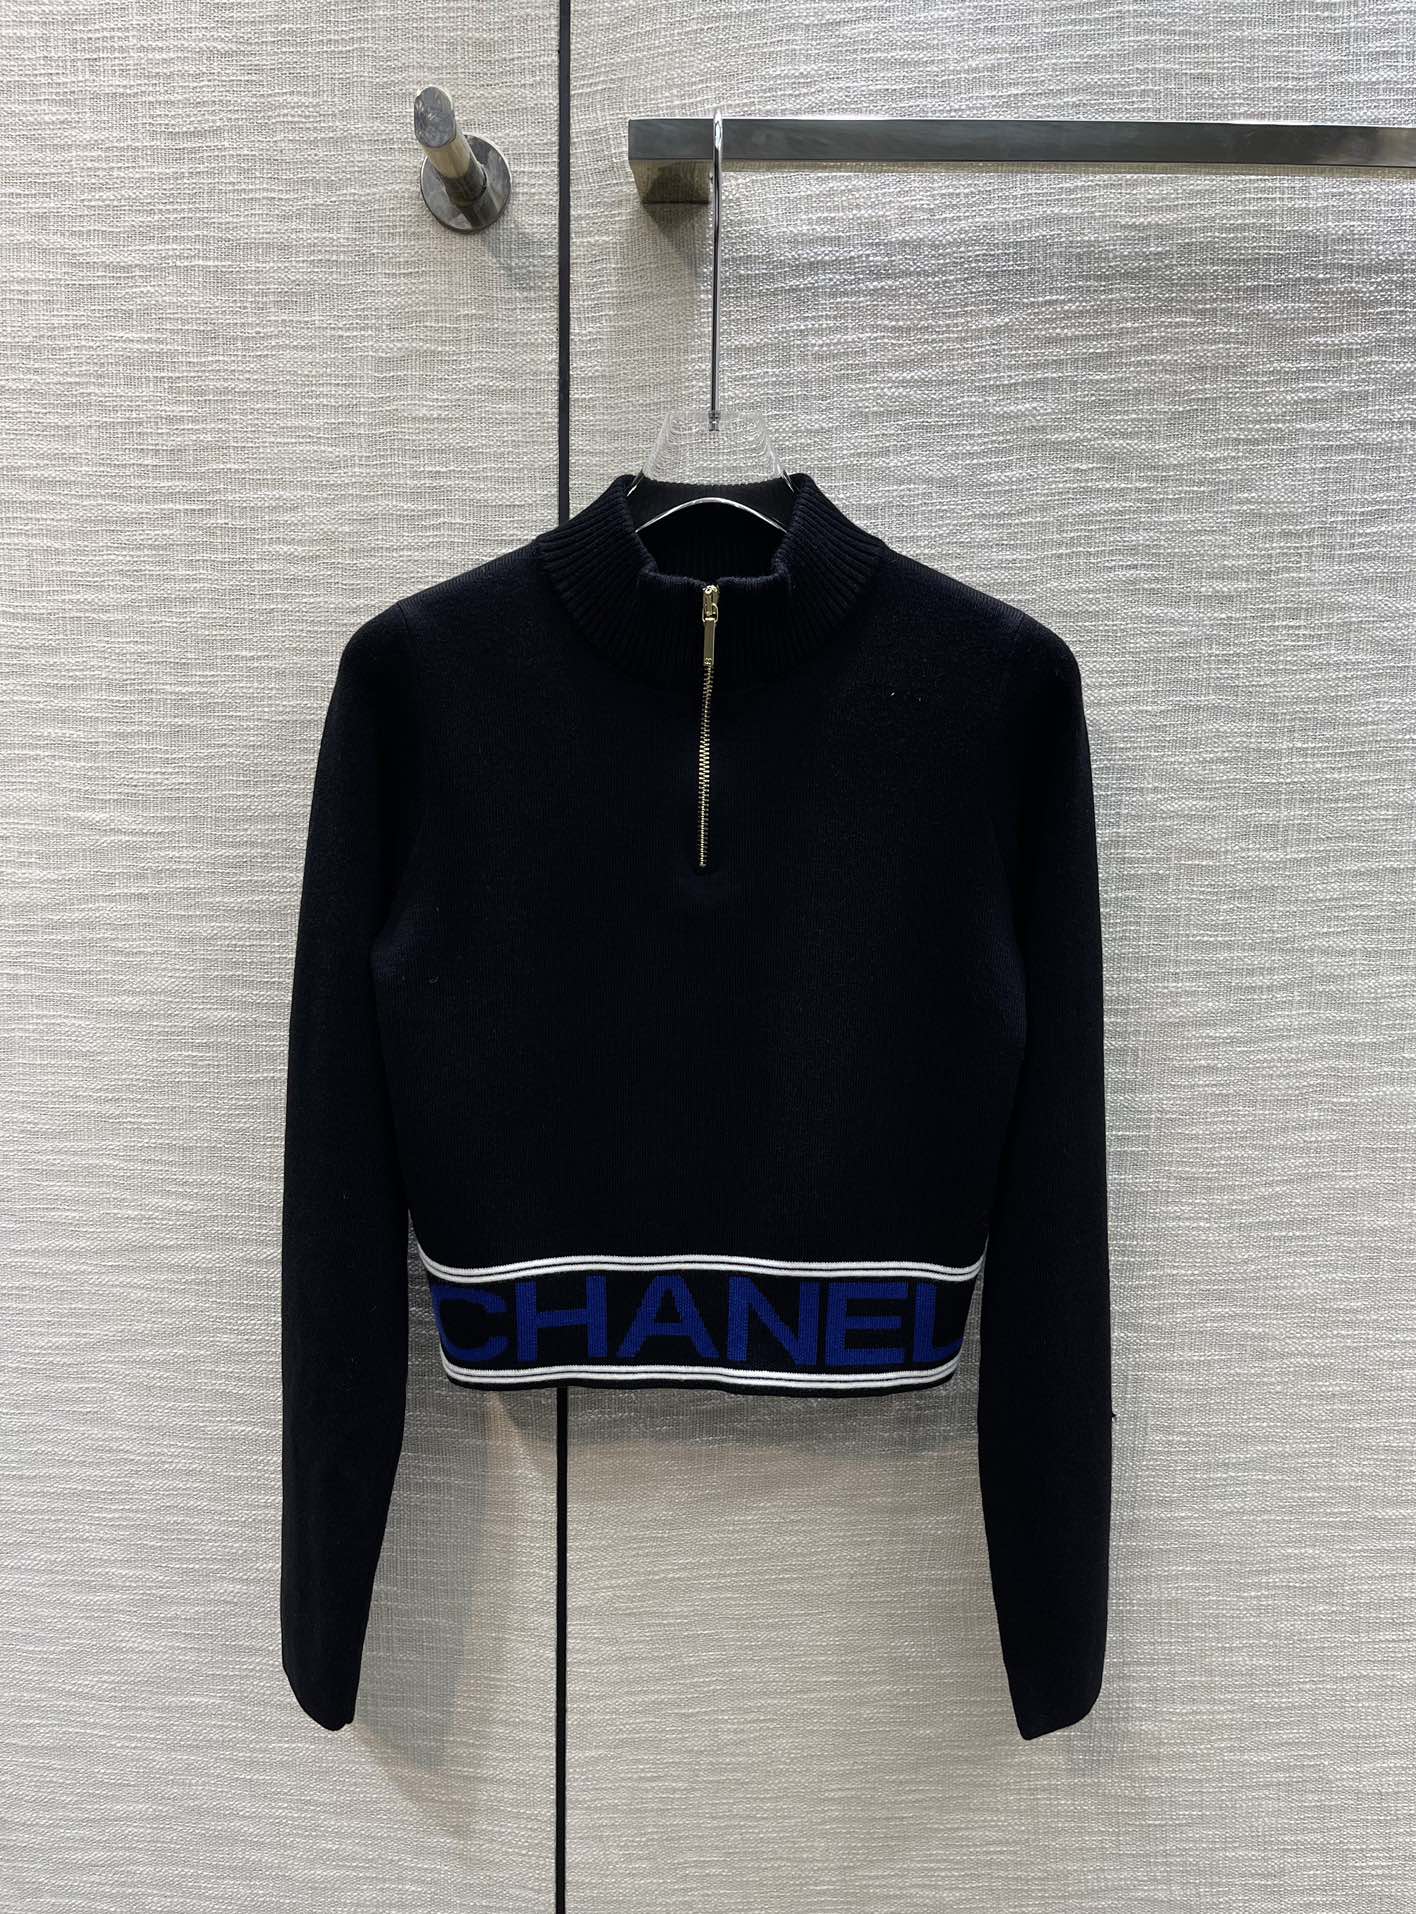 Chanel Clothing Knit Sweater Sweatshirts Knitting Spring Collection